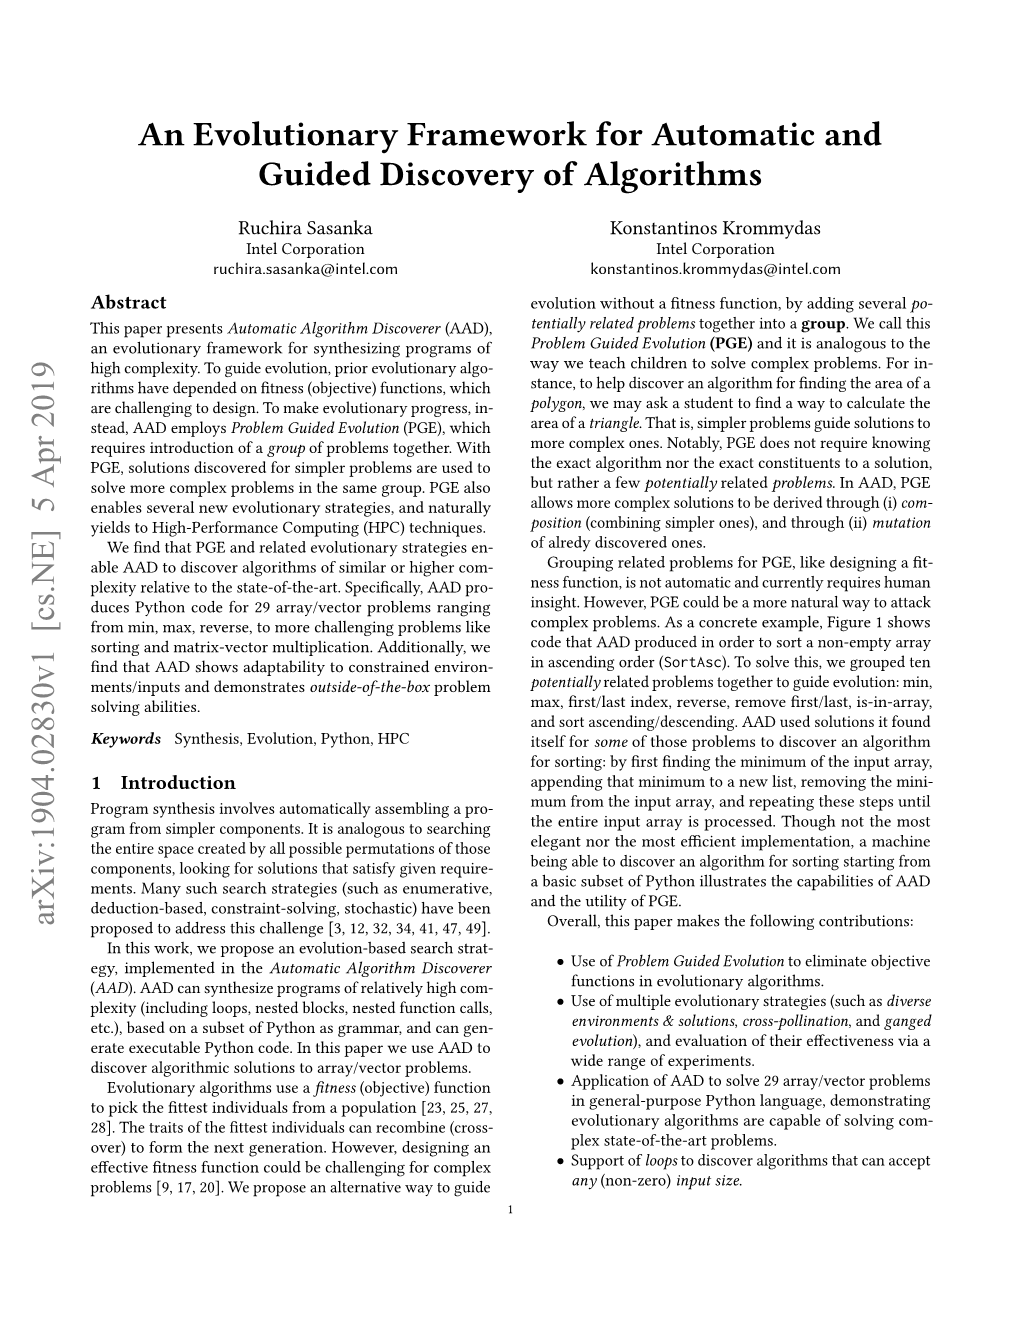 An Evolutionary Framework for Automatic and Guided Discovery of Algorithms